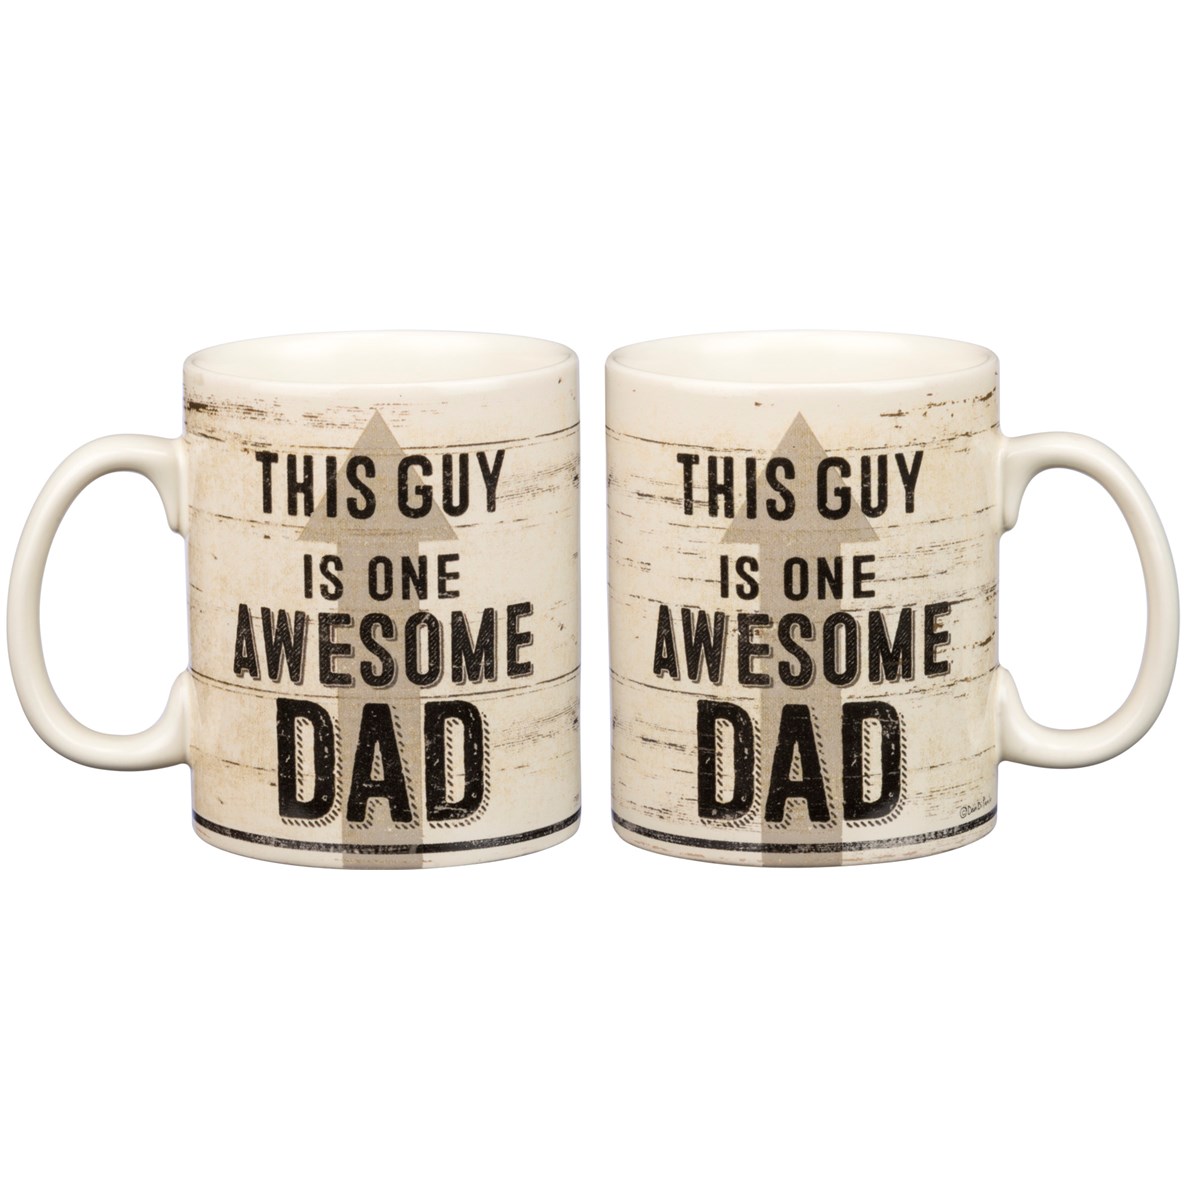 This Guy Is One Awesome Dad Mug - Stoneware